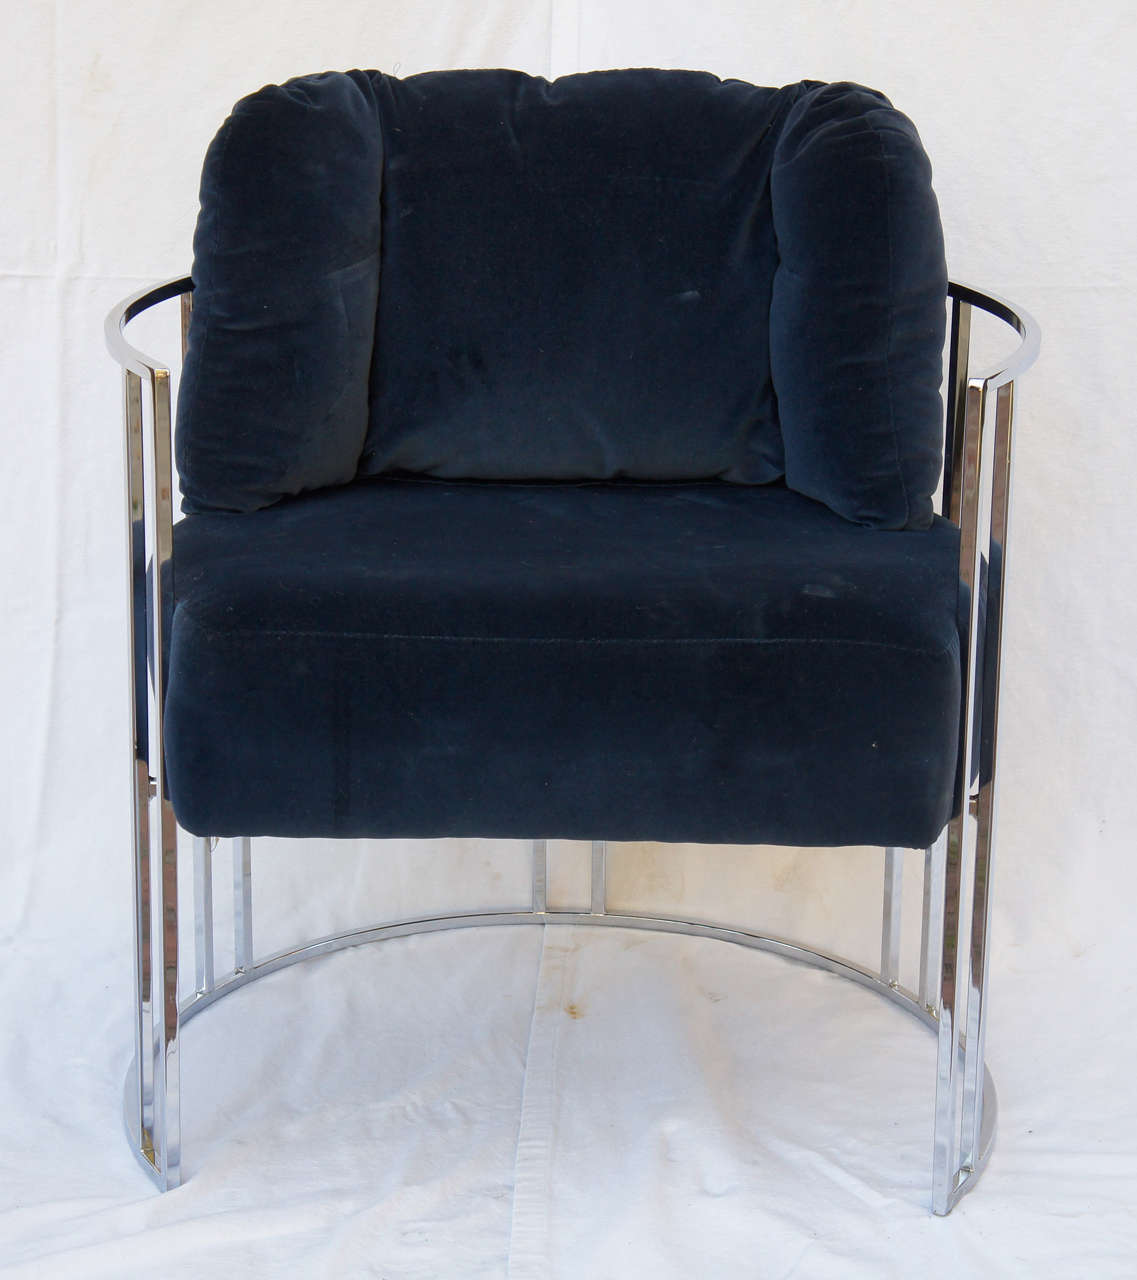 the classic thin chrome frame true to the Baughman designs.
A barrel chair with a hint of Deco.
Freshen them up with a fitted back cushion and some new upholstery and these chairs are good to go.